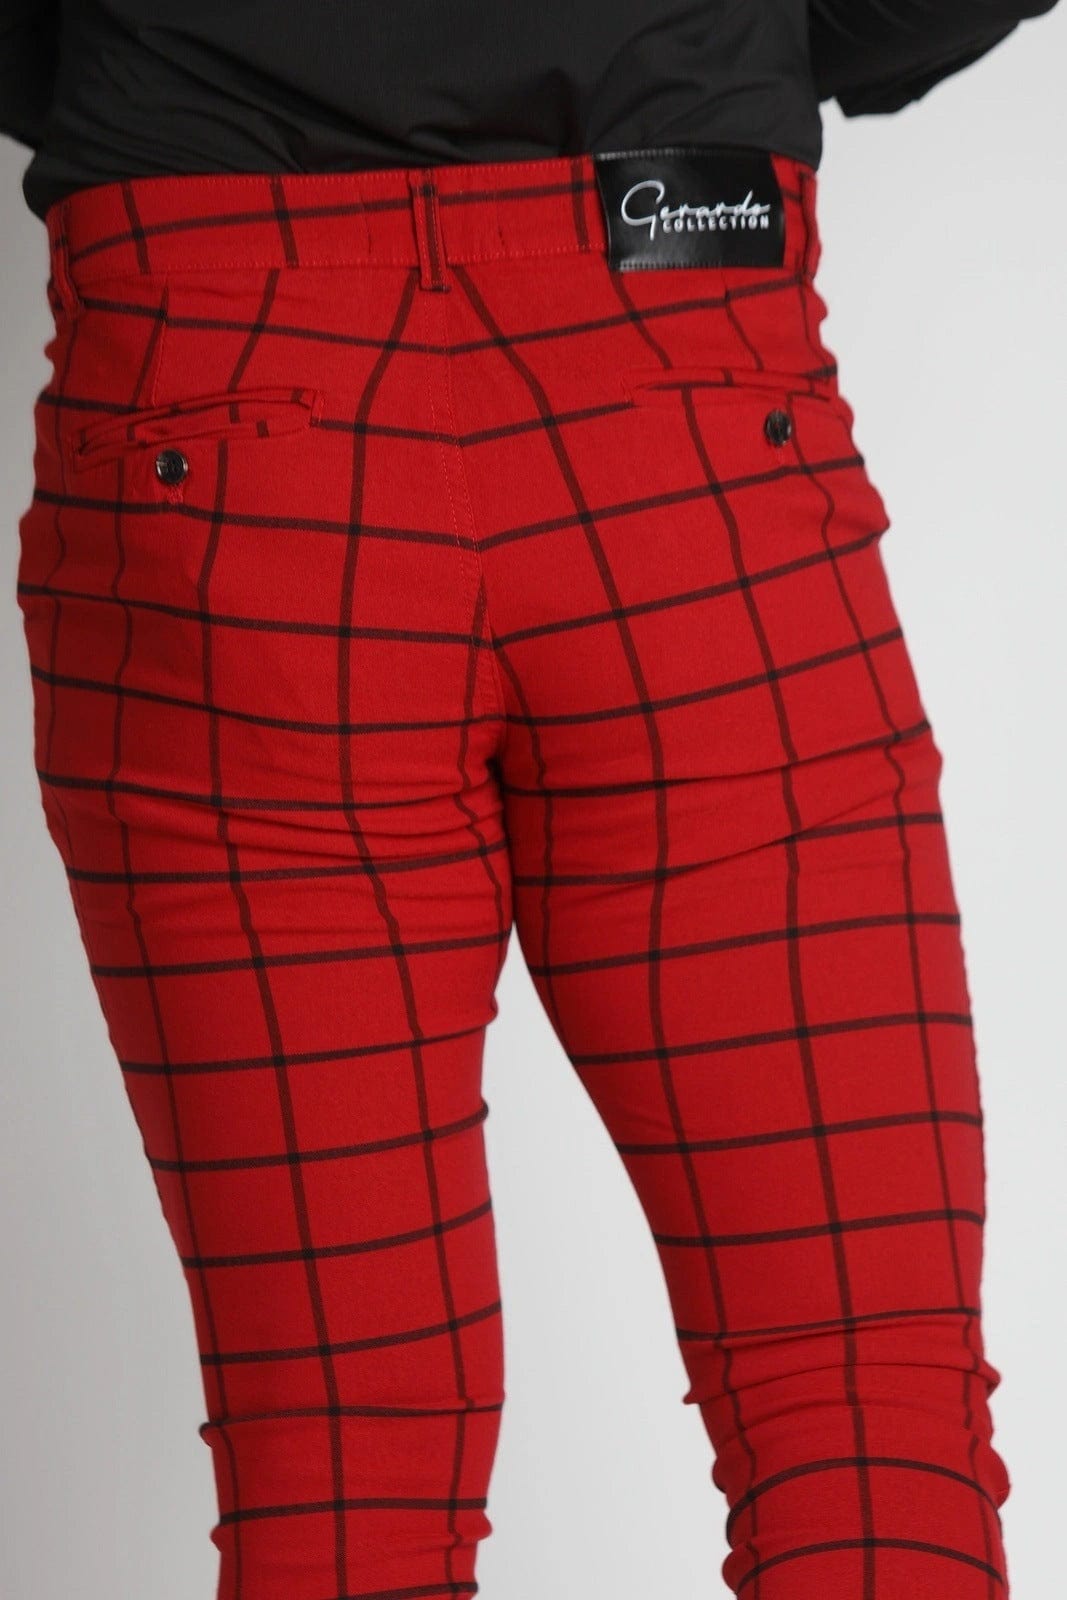 Mens Red Checkered Dress Pants - Gerardo Collection